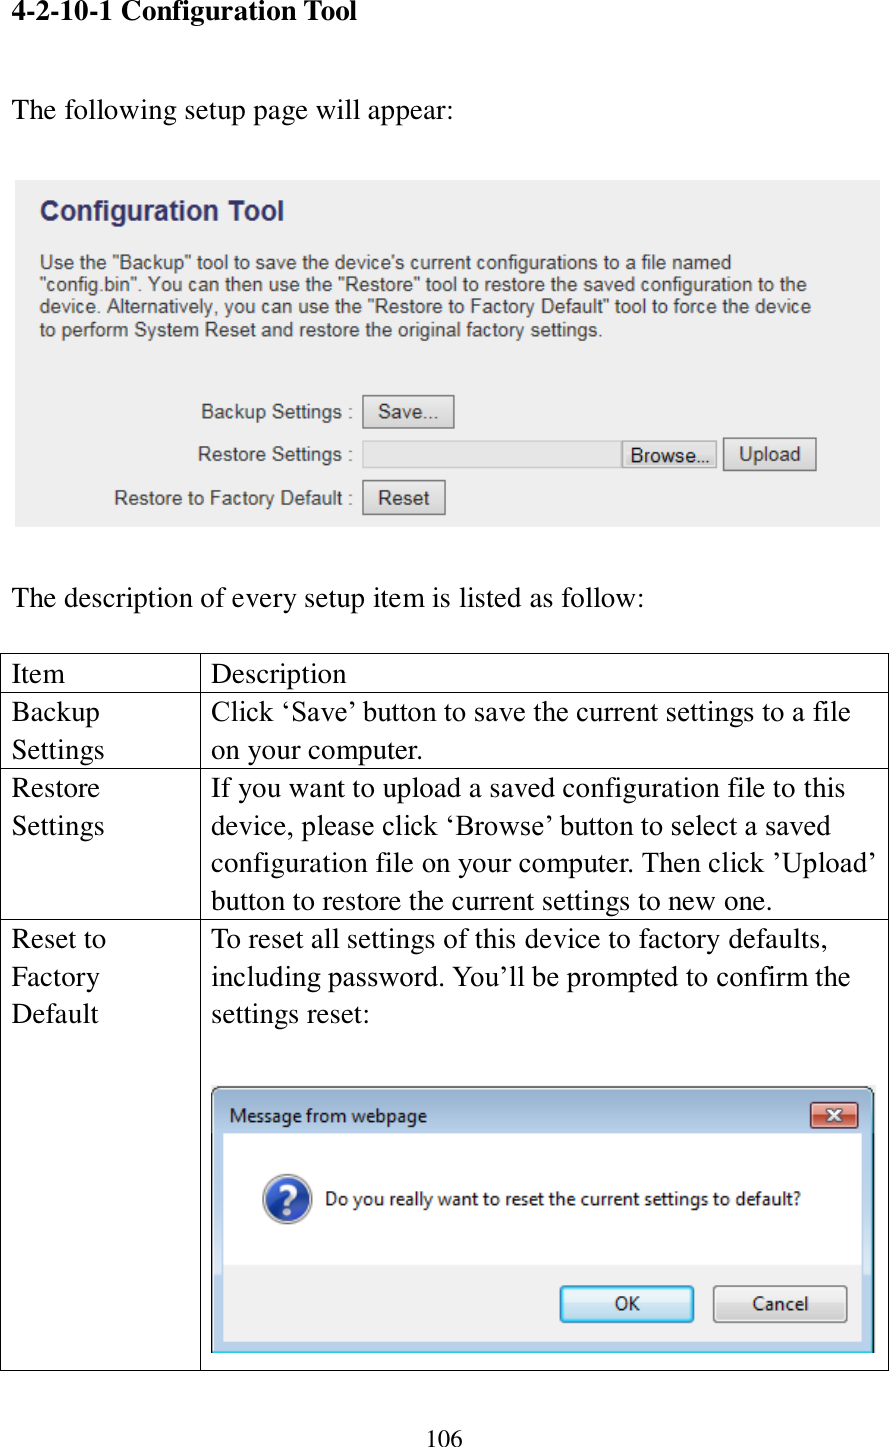 106  4-2-10-1 Configuration Tool  The following setup page will appear:    The description of every setup item is listed as follow:  Item Description Backup Settings Click ‘Save’ button to save the current settings to a file on your computer.   Restore Settings If you want to upload a saved configuration file to this device, please click ‘Browse’ button to select a saved configuration file on your computer. Then click ’Upload’ button to restore the current settings to new one. Reset to Factory Default To reset all settings of this device to factory defaults, including password. You’ll be prompted to confirm the settings reset:   